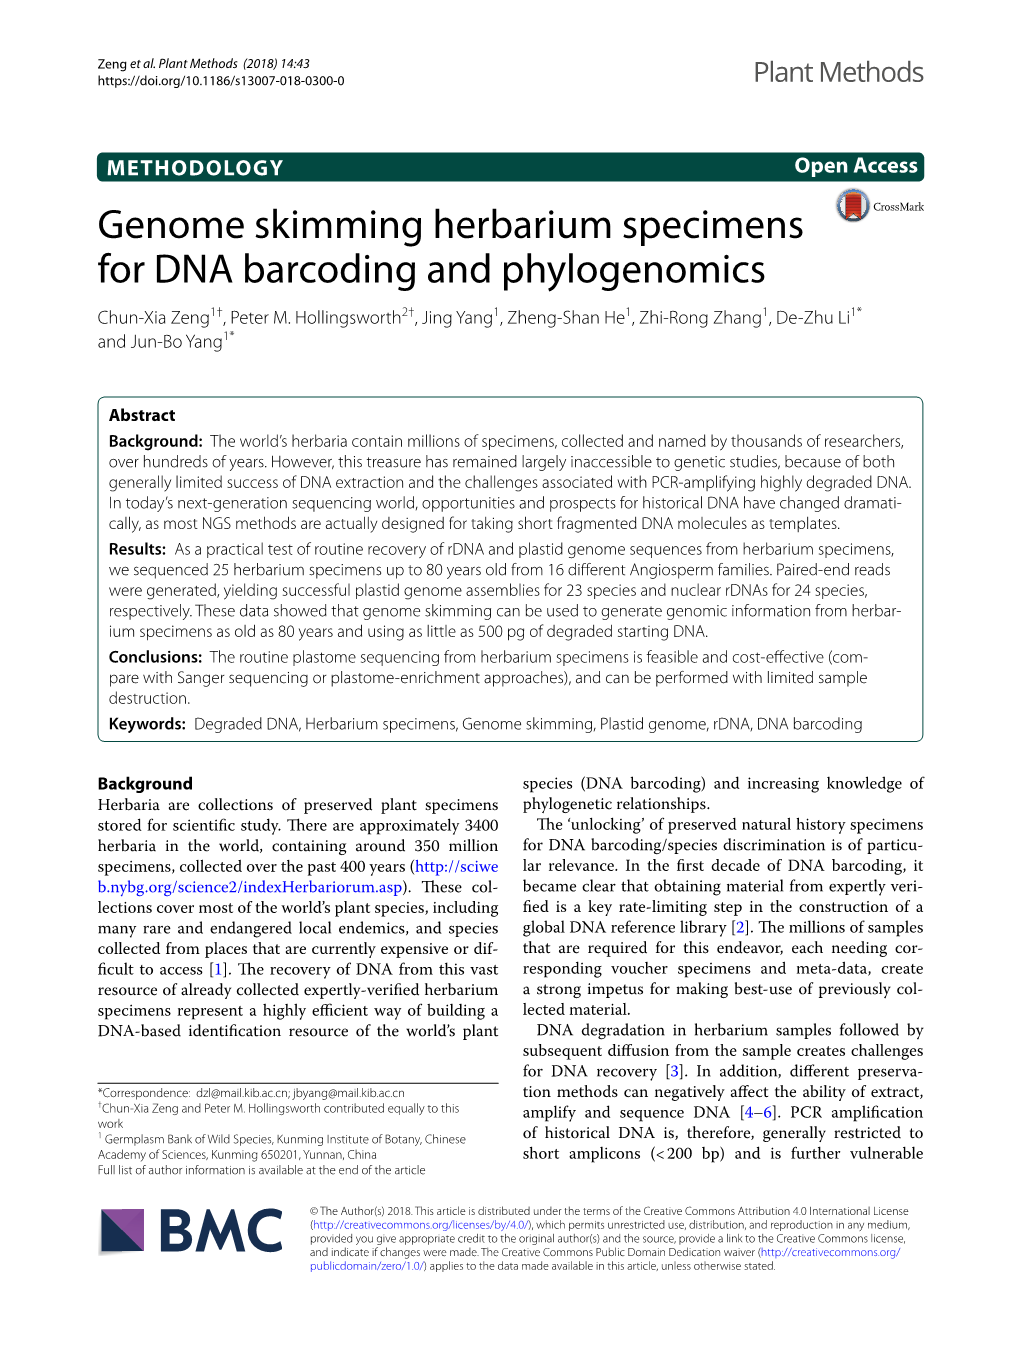 Genome Skimming Herbarium Specimens for DNA Barcoding and Phylogenomics Chun‑Xia Zeng1†, Peter M